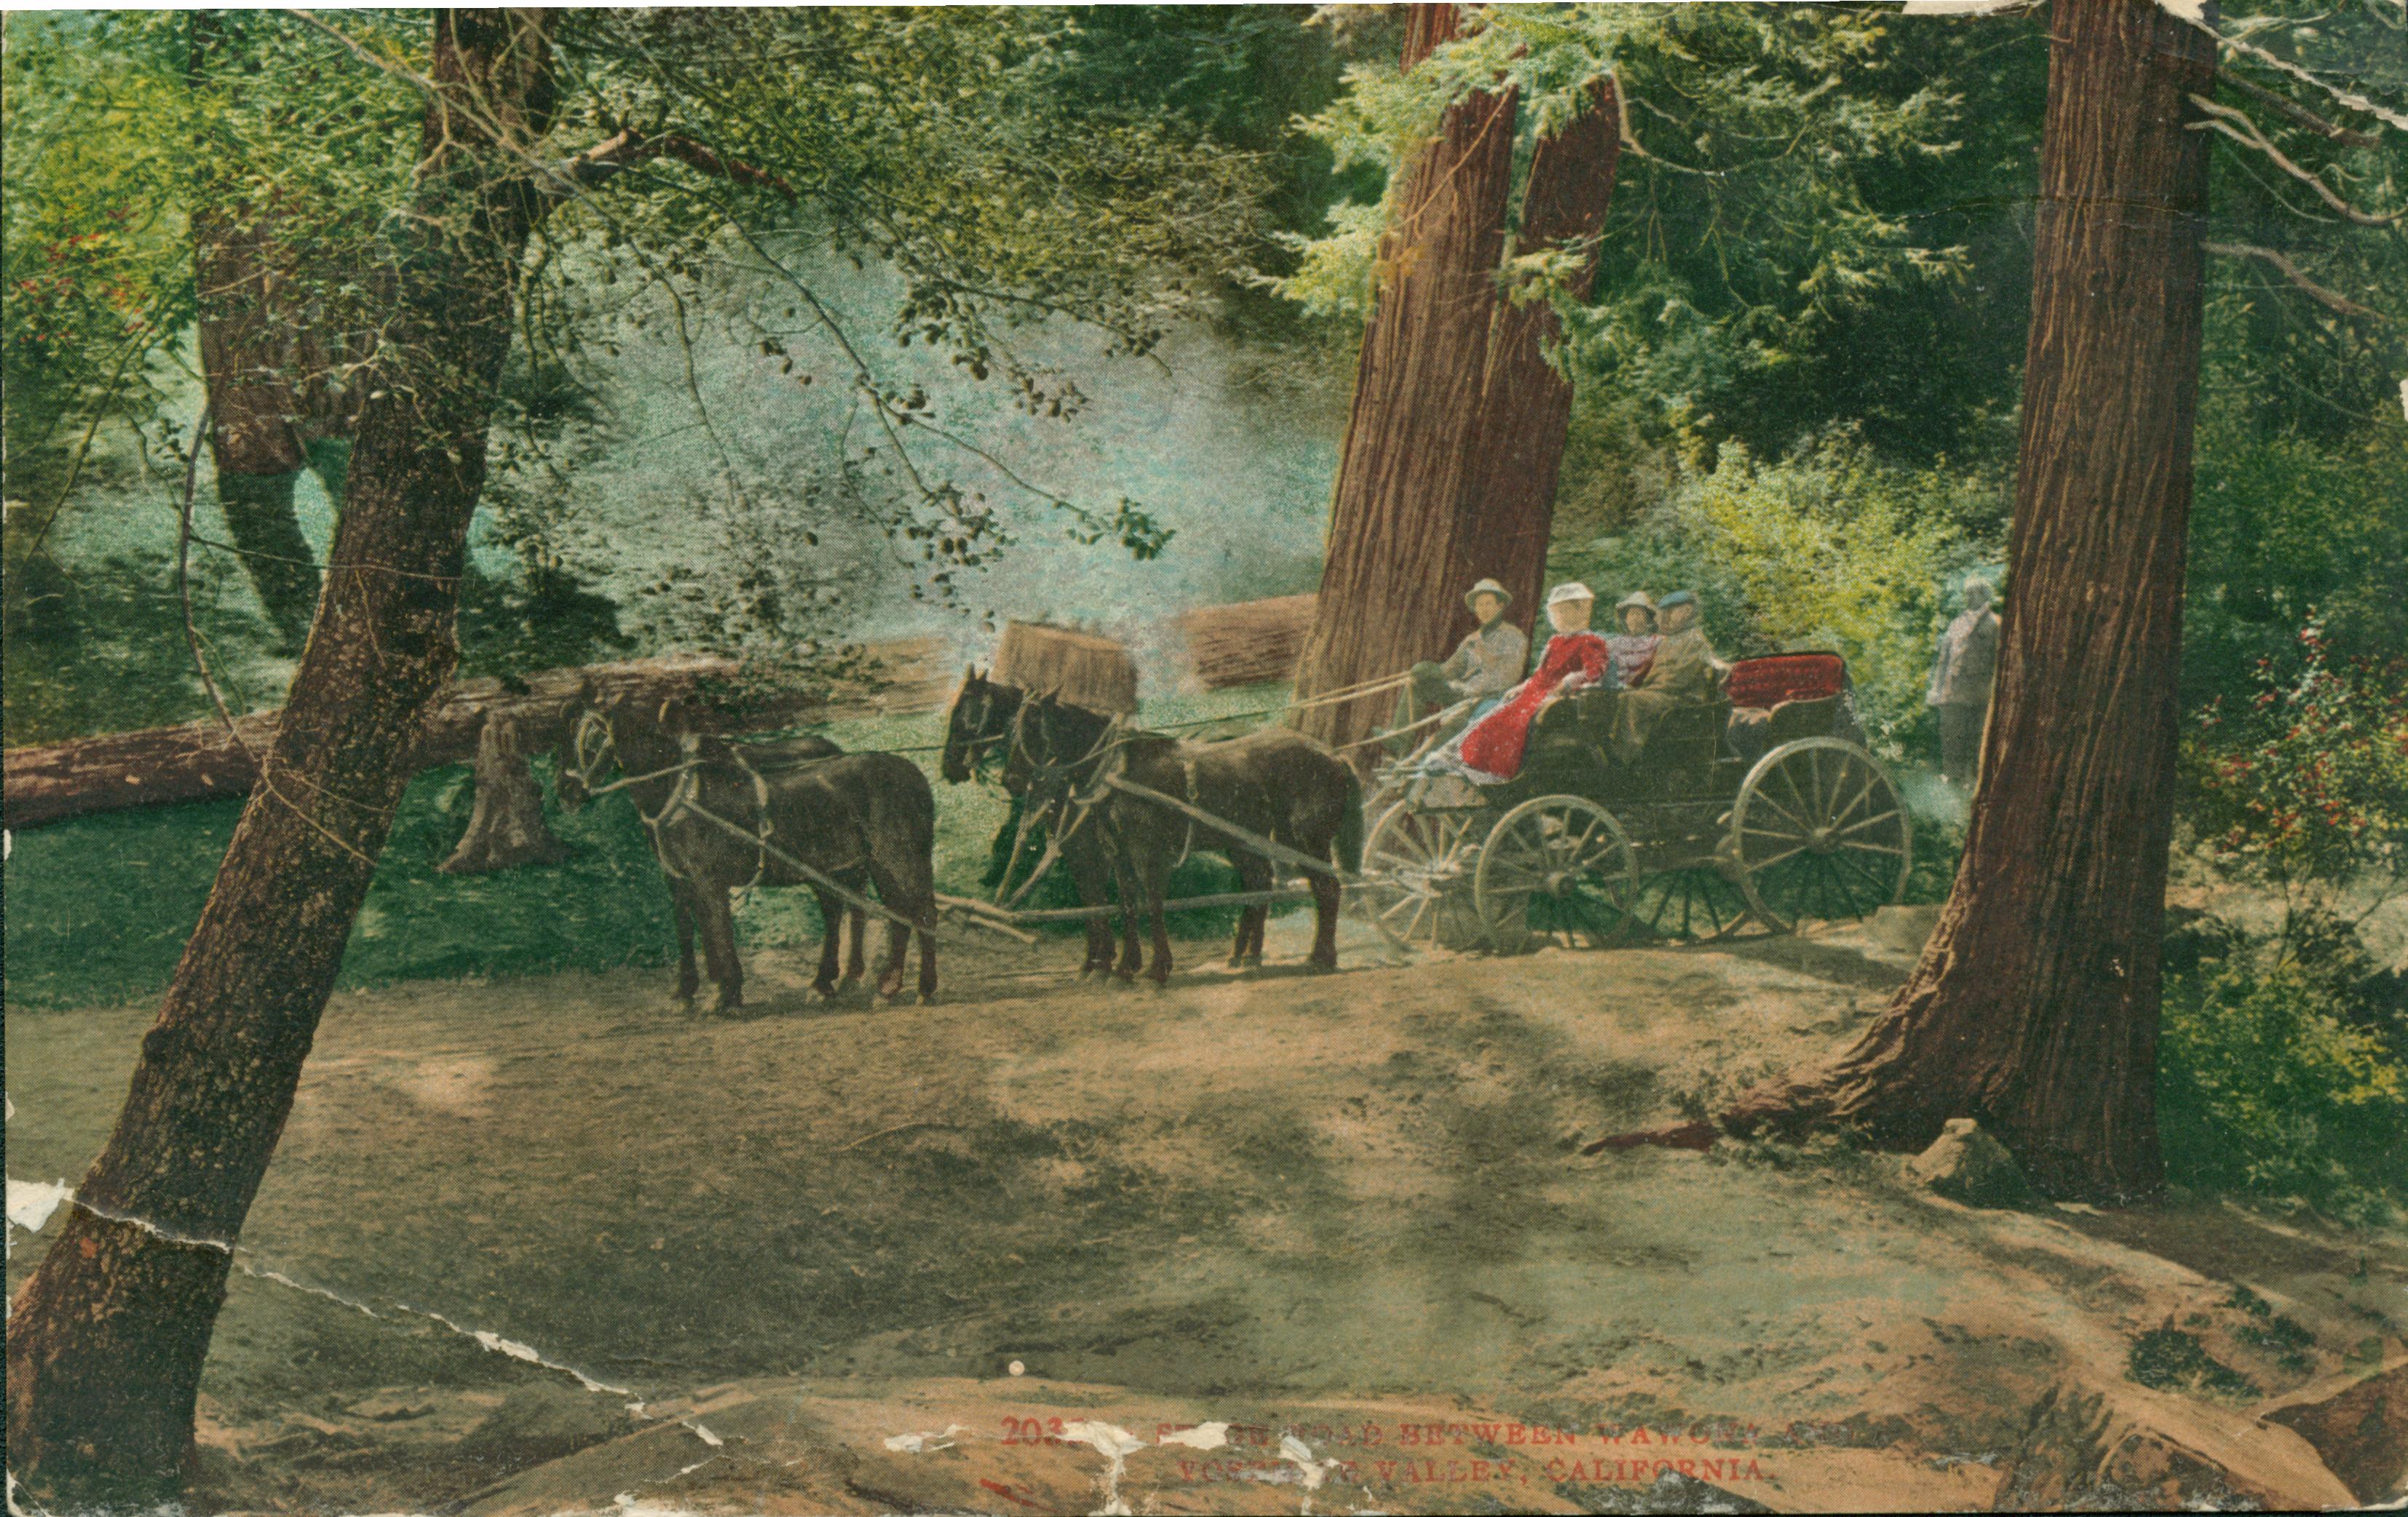 Shows a stagecoach framed by trees stopped on a dirt road